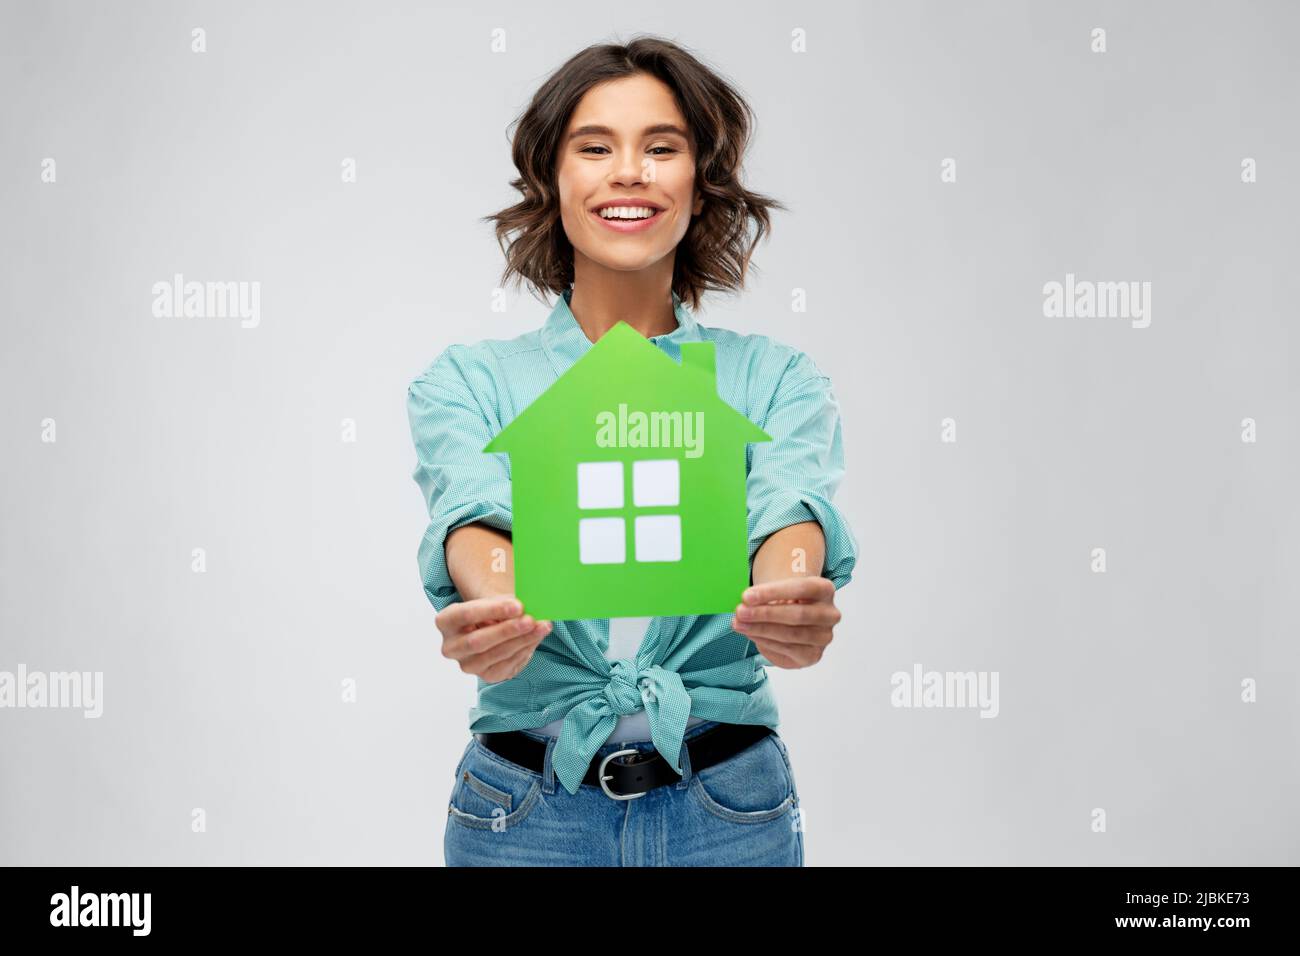 smiling young woman holding green house Stock Photo